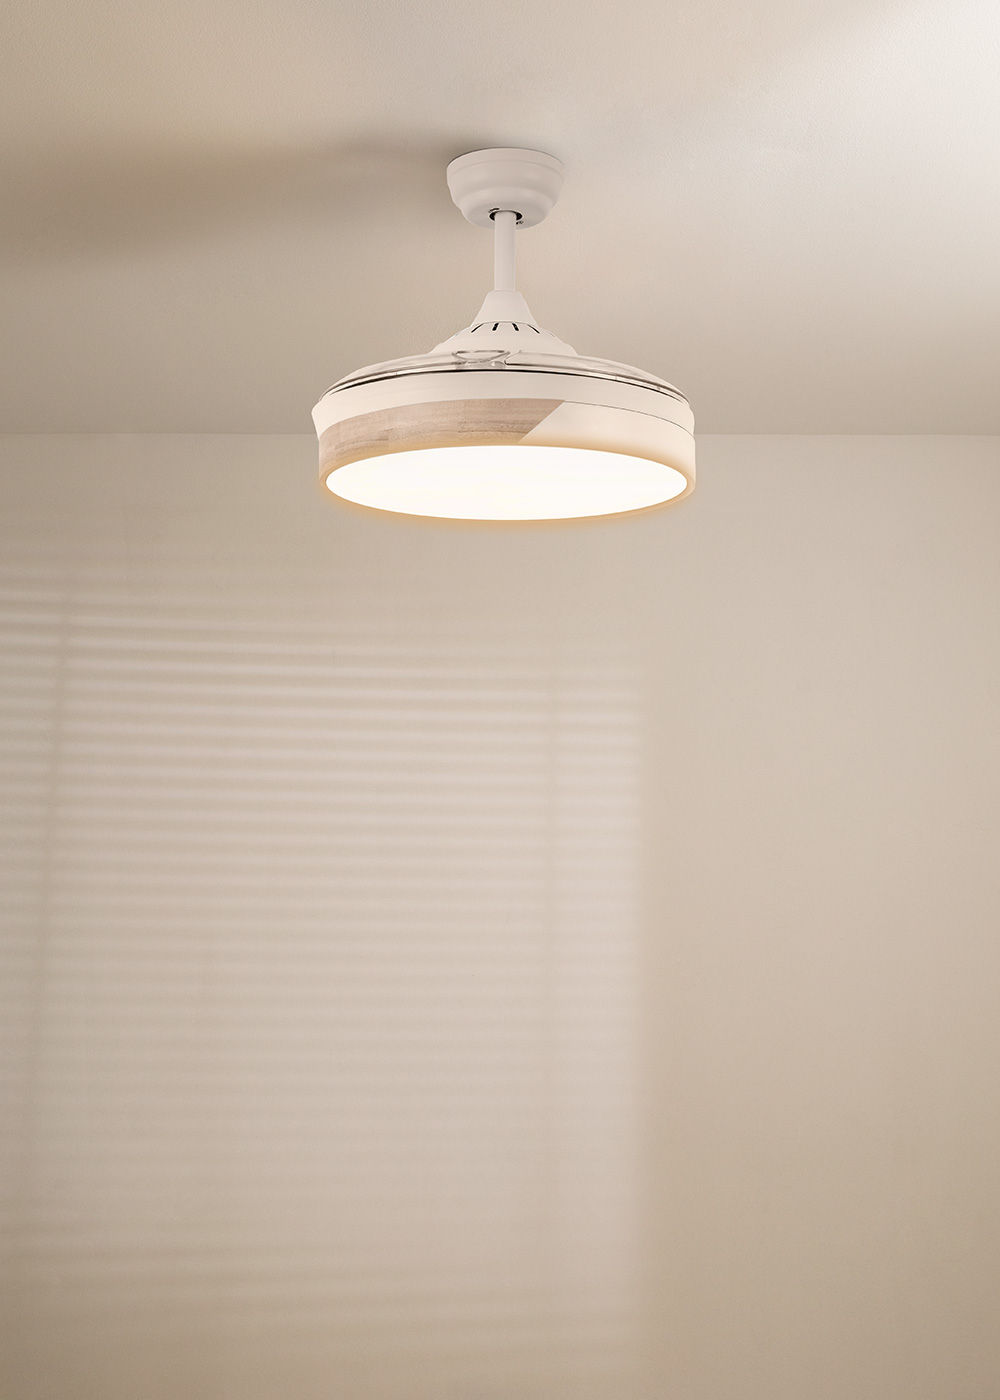 Ceiling Fans With Retractable Blades